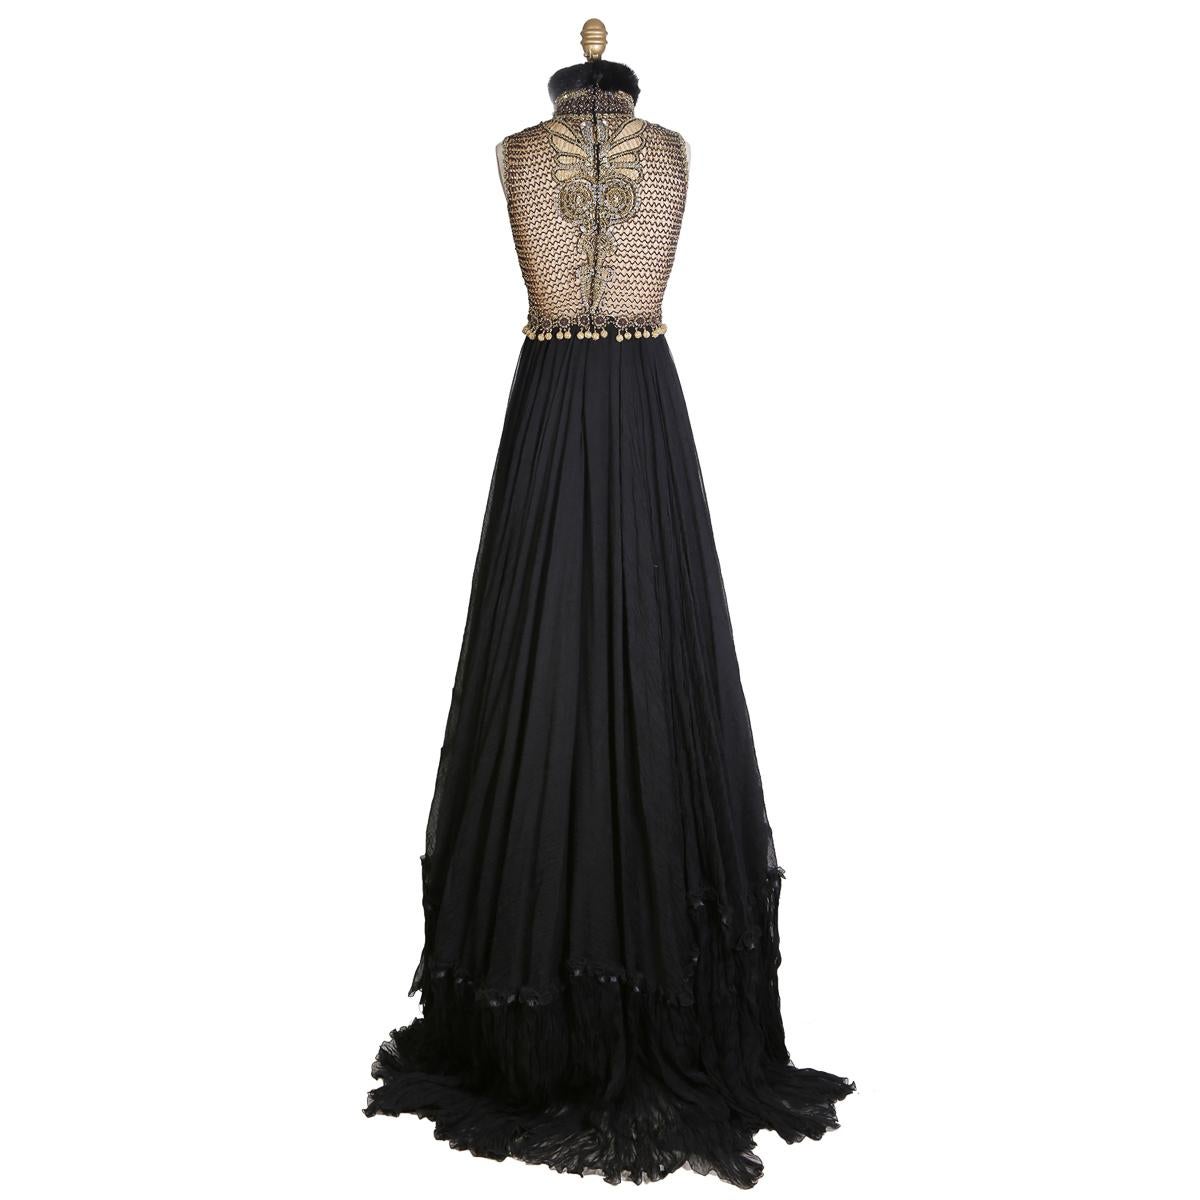 Vintage gown by Gianfranco Ferre
Chiffon with beaded netting
High fur collar
Includes separate black underskirt
Back zipper closure
Condition: Excellent vintage condition

Size/Measurements:
Italian size 42